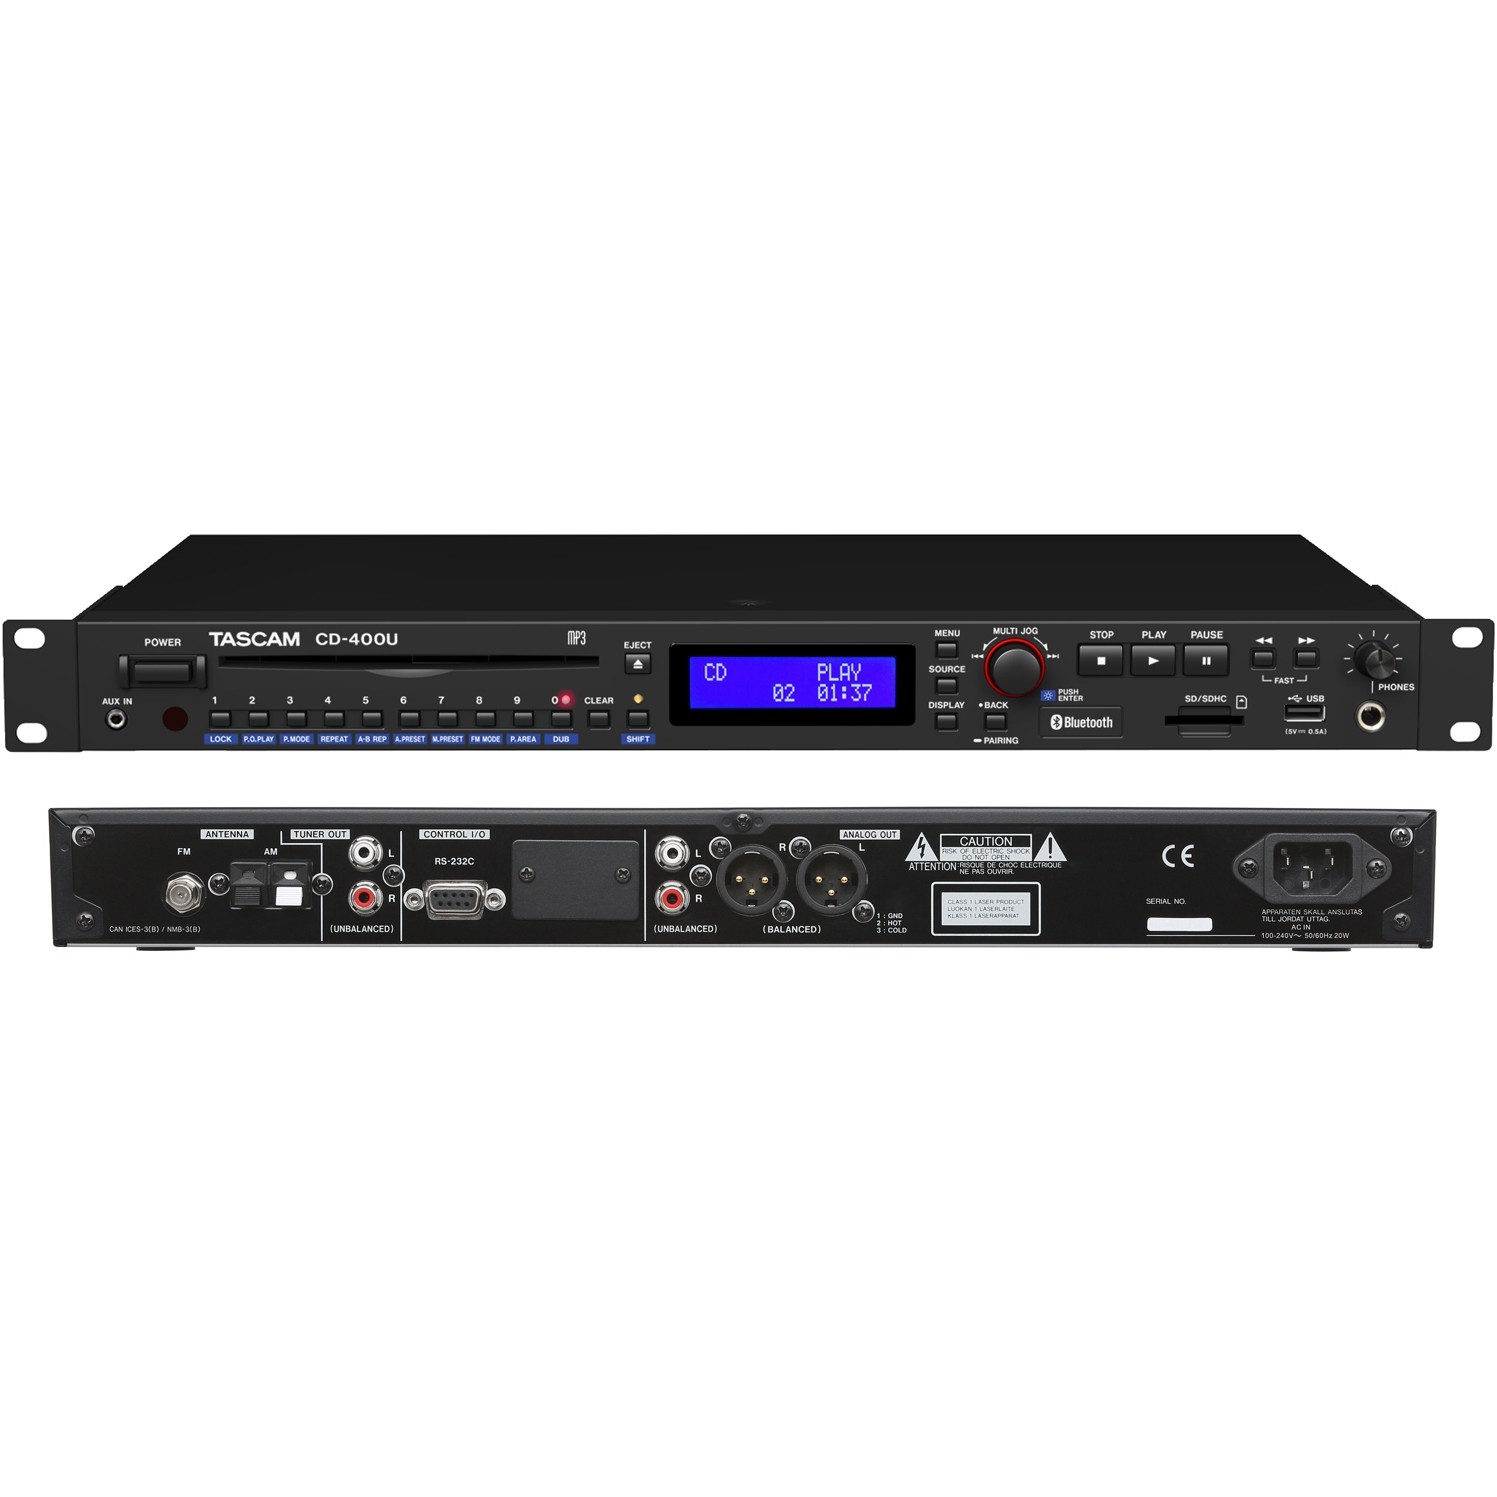 Tascam CD-400U CD and Media Player with Bluetooth